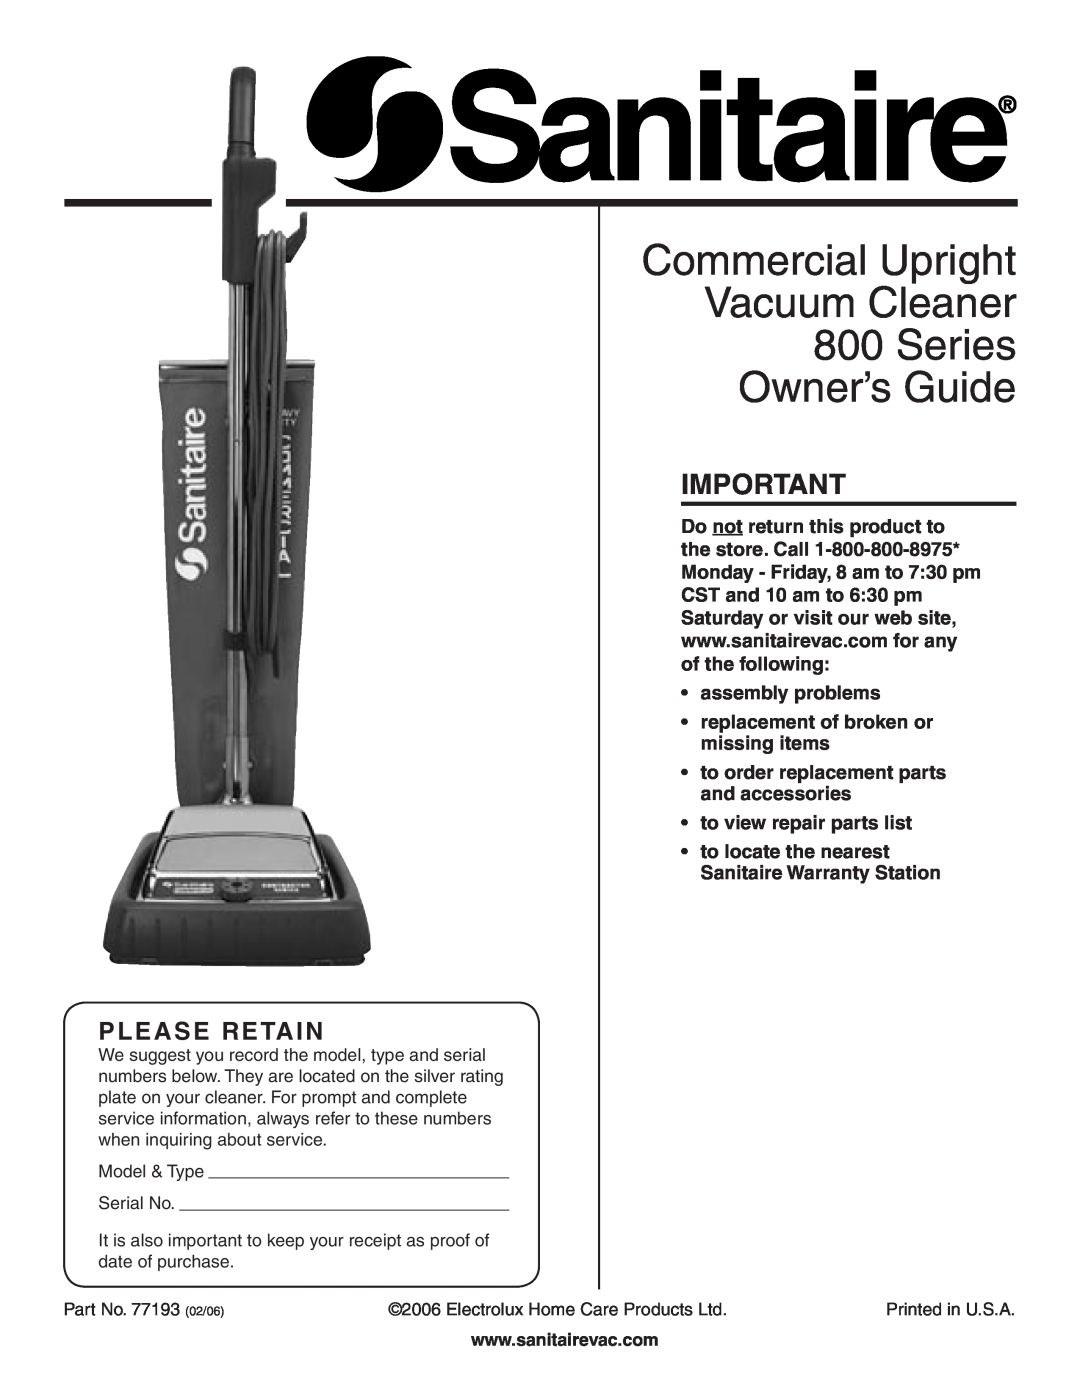 Sanitaire 600 warranty En Mexico llame al, Commercial Upright Vacuum Cleaner, and 800 Series Ownerʼs Guide, Please Retain 